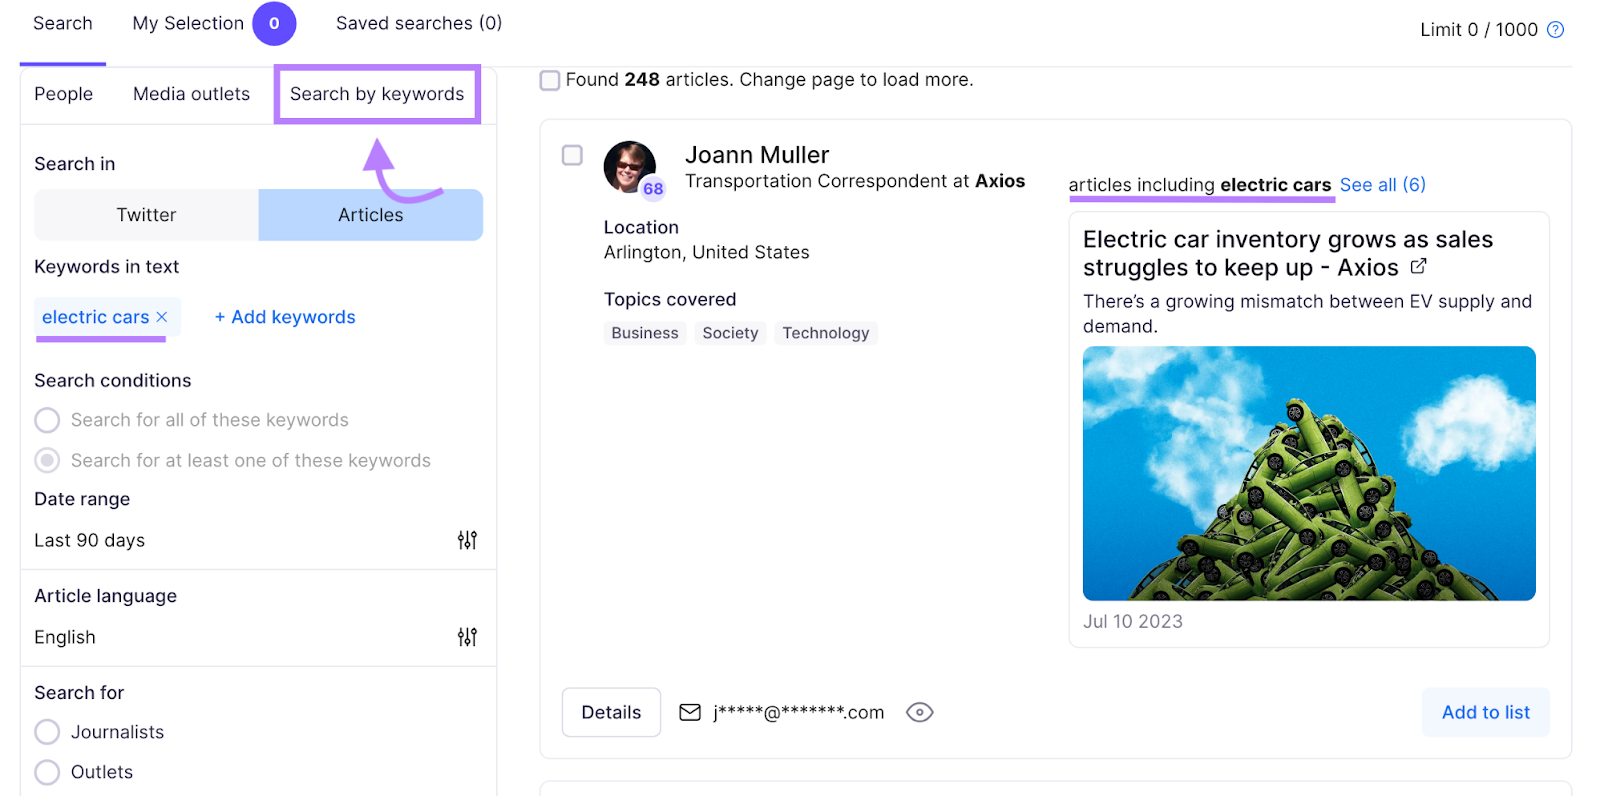 Prowly lets your search media contacts by keyword or topic